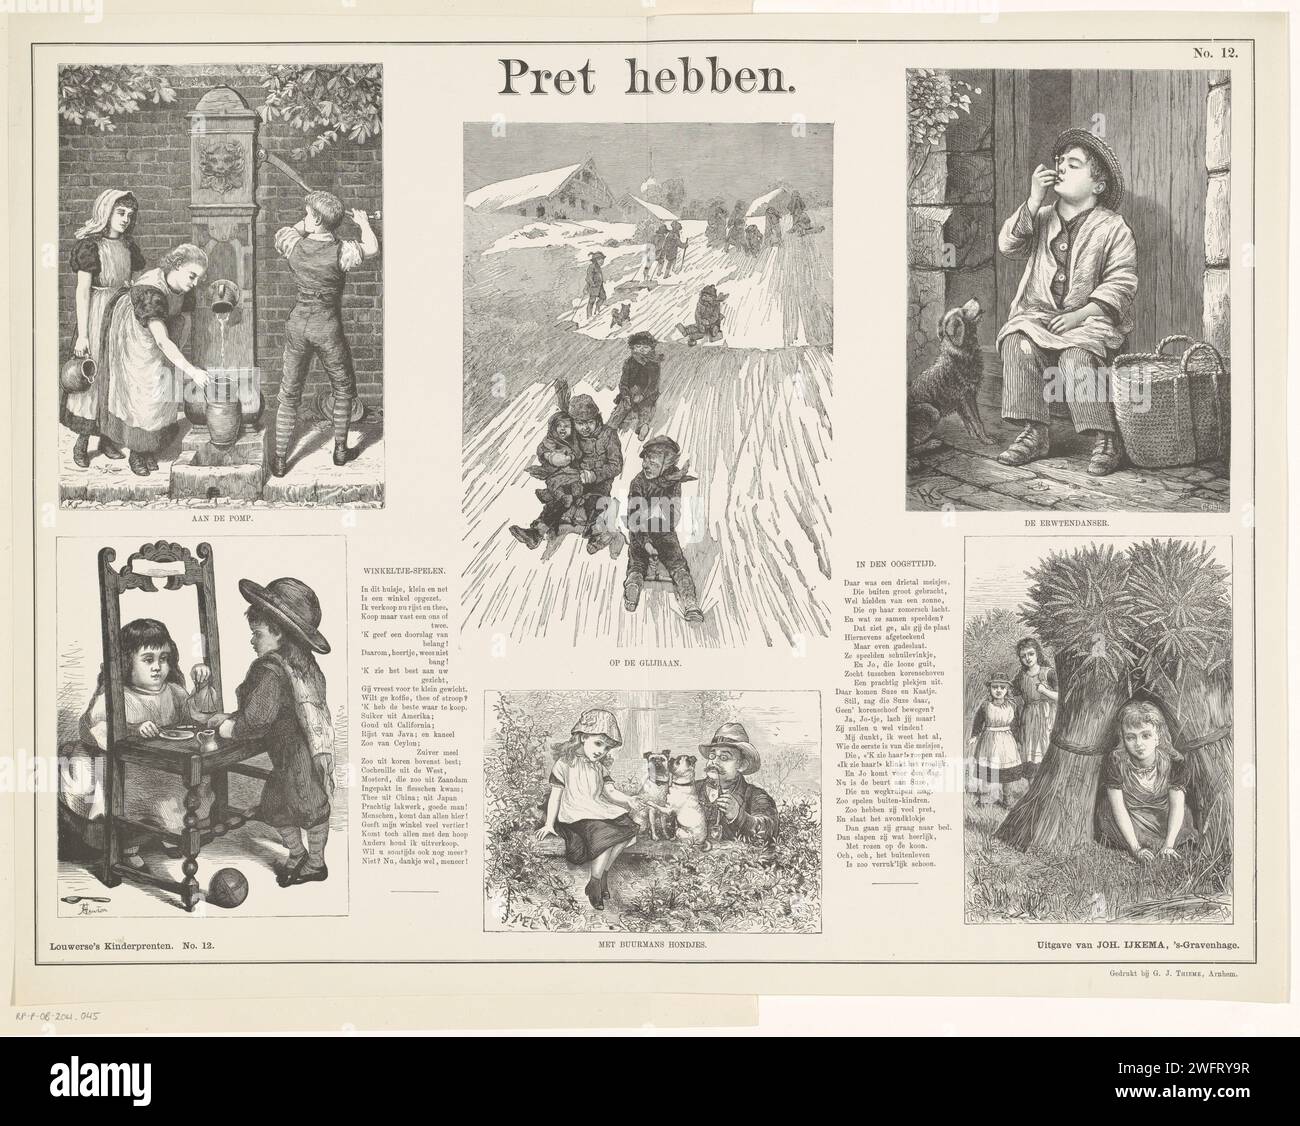 Have fun, 1882 - 1905 print Leaf with 6 performances of children's games and activities, such as getting water at the pump and playing with the neighbor's dogs. Between the images verses in book print. Numbered at the top right and bottom left: No. 12. Publisher: The BEPRITER: Arngem paper printing block / letterpress printing children's games and plays. child playing with animals. small sleigh (winter sports) Stock Photo